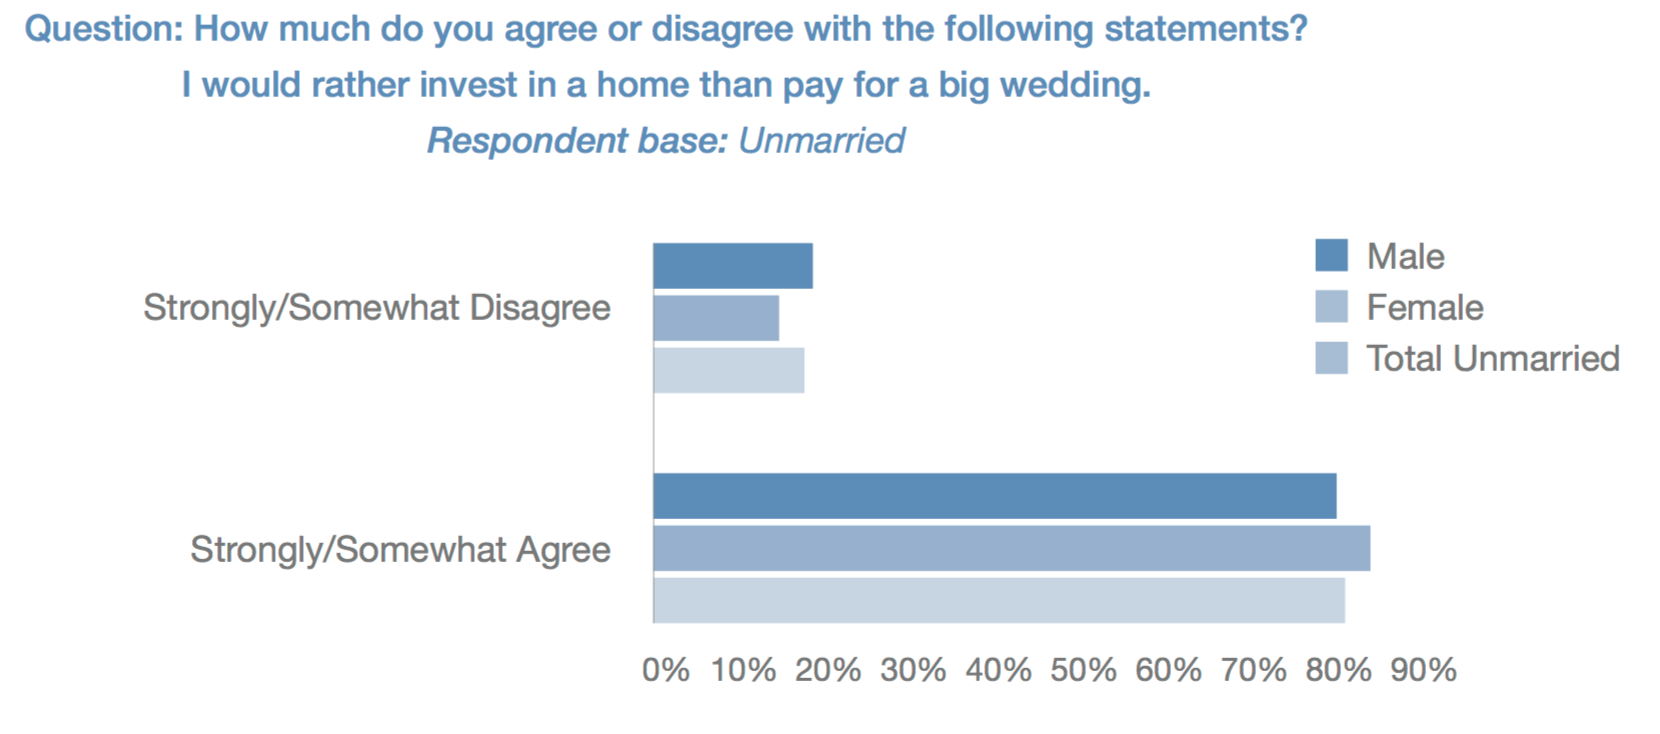 A bar chart of survey responses for the question of whether an unmarried respondent would rather pay for a home or a wedding.